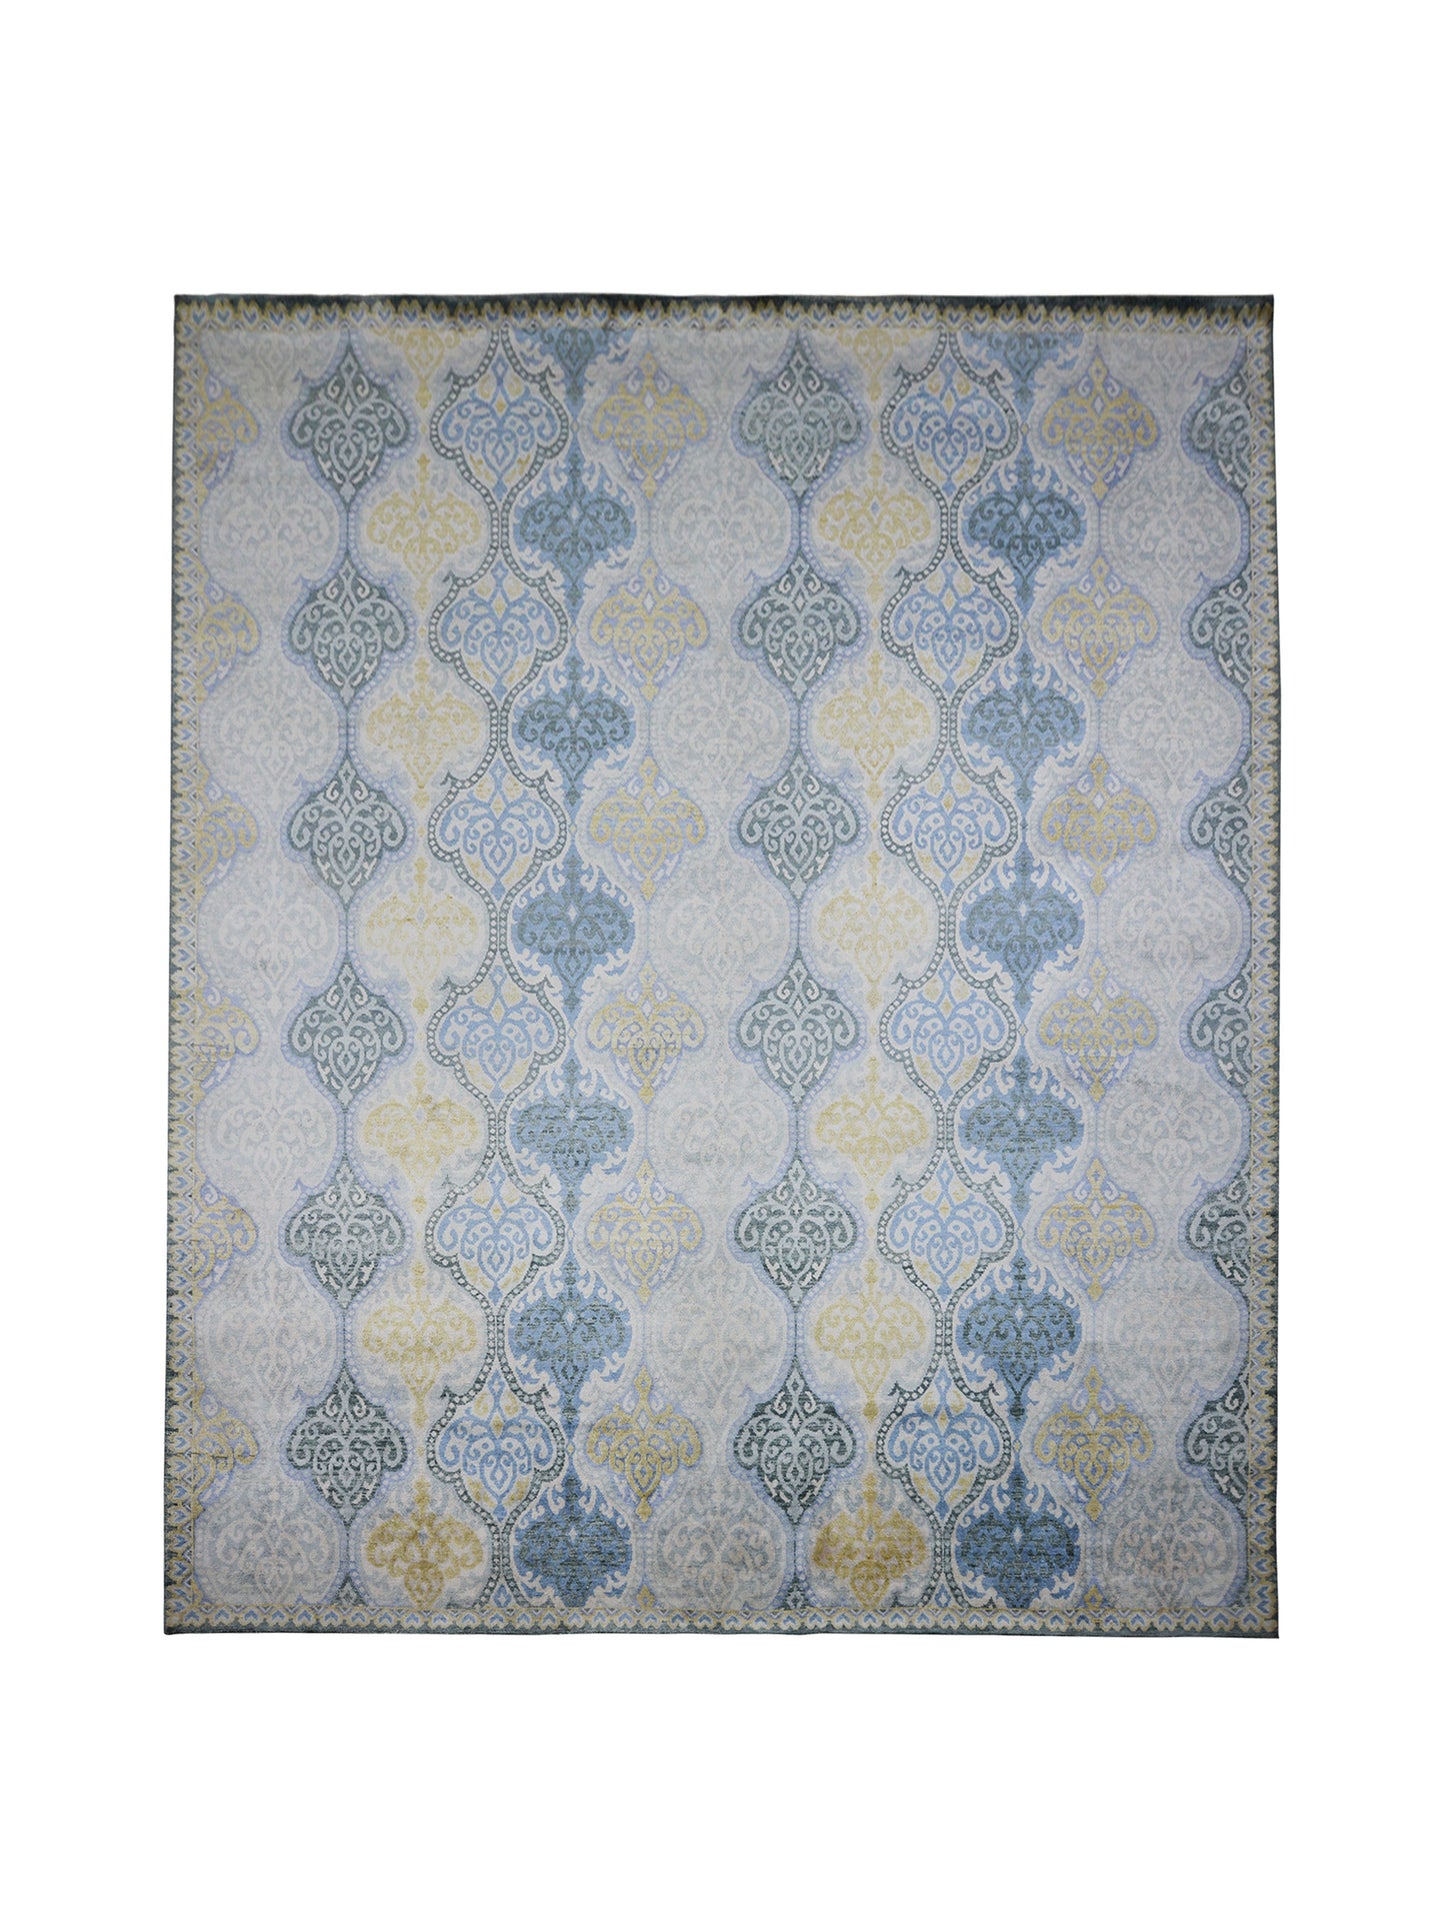 Get trendy with Wazir Silver, Gold and Light Blue Transitional Damask Handknotted Area Rug - Transitional Rugs available at Jaipur Oriental Rugs. Grab yours for $5795.00 today!